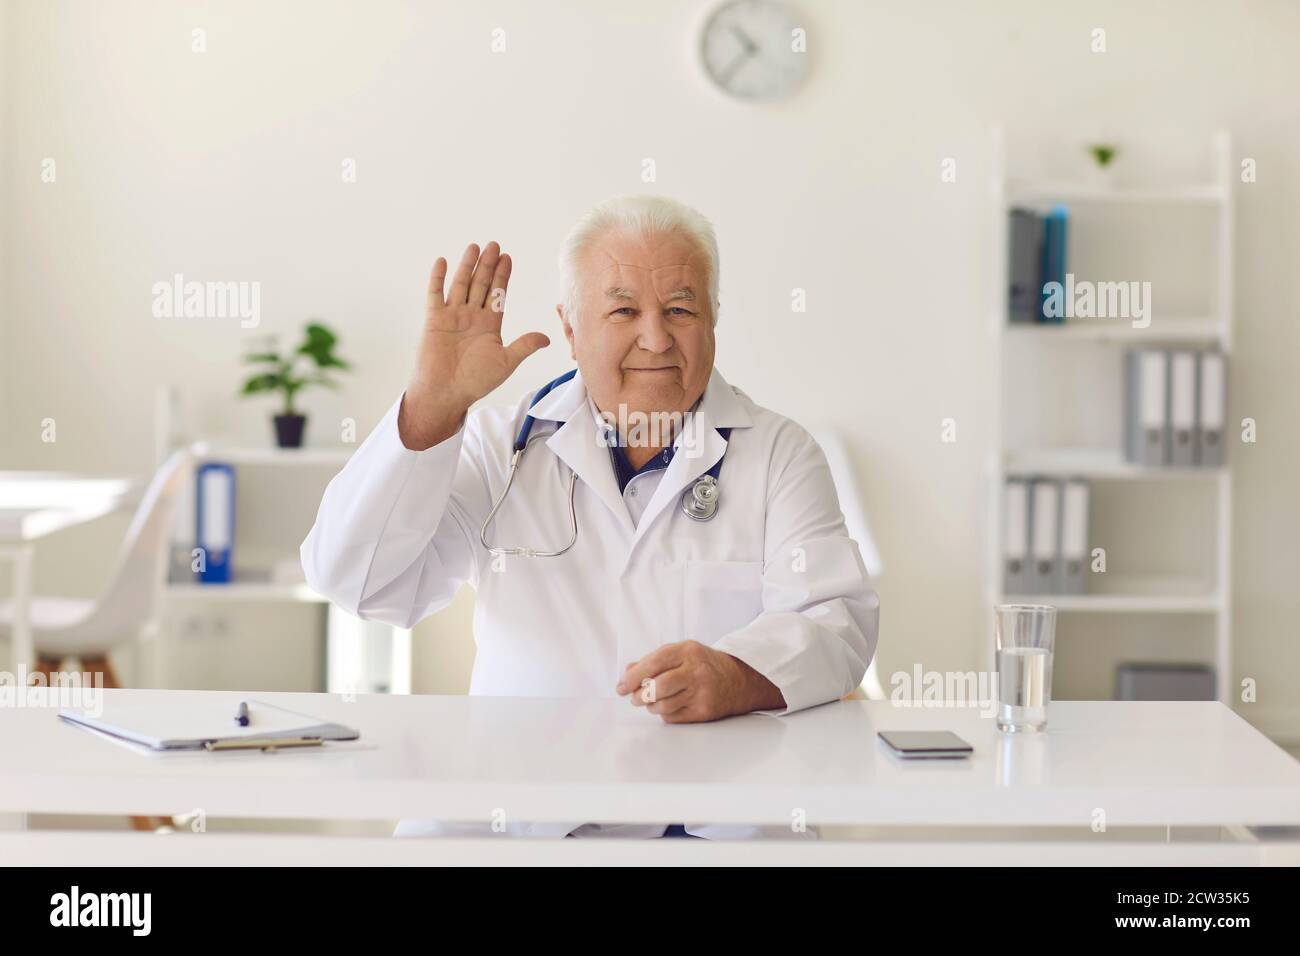 Friendly doctor waving hand welcoming clients in hospital office or on his medical video channel Stock Photo